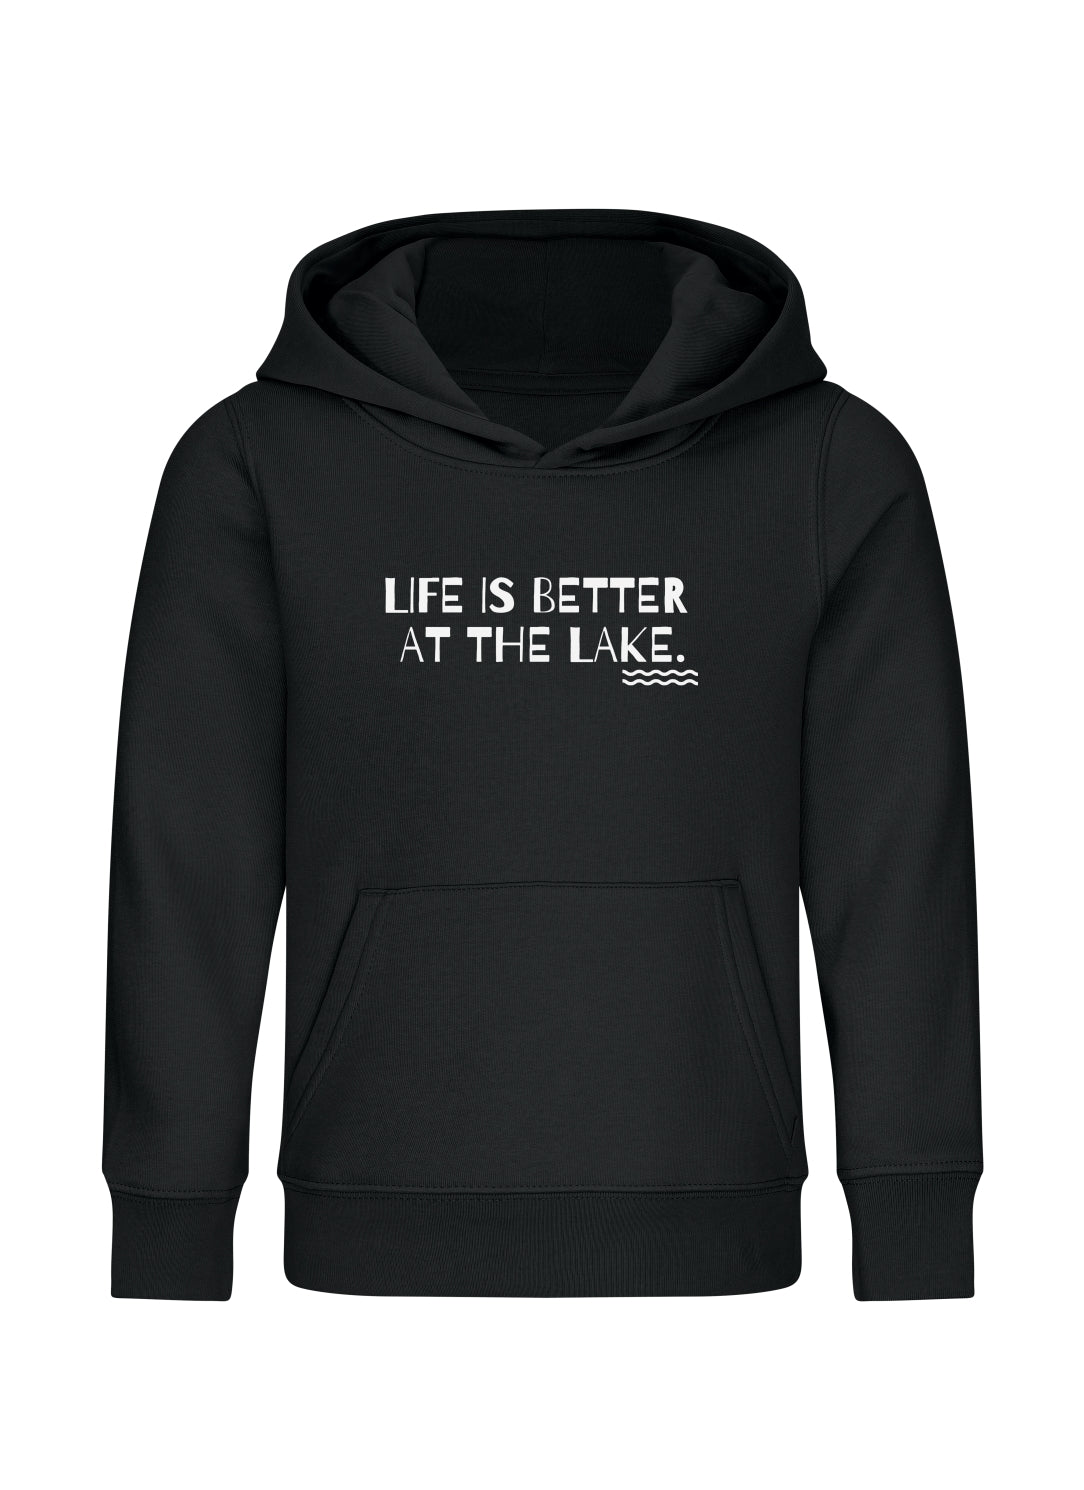 Life is better at the lake (Hoodie Kinder)